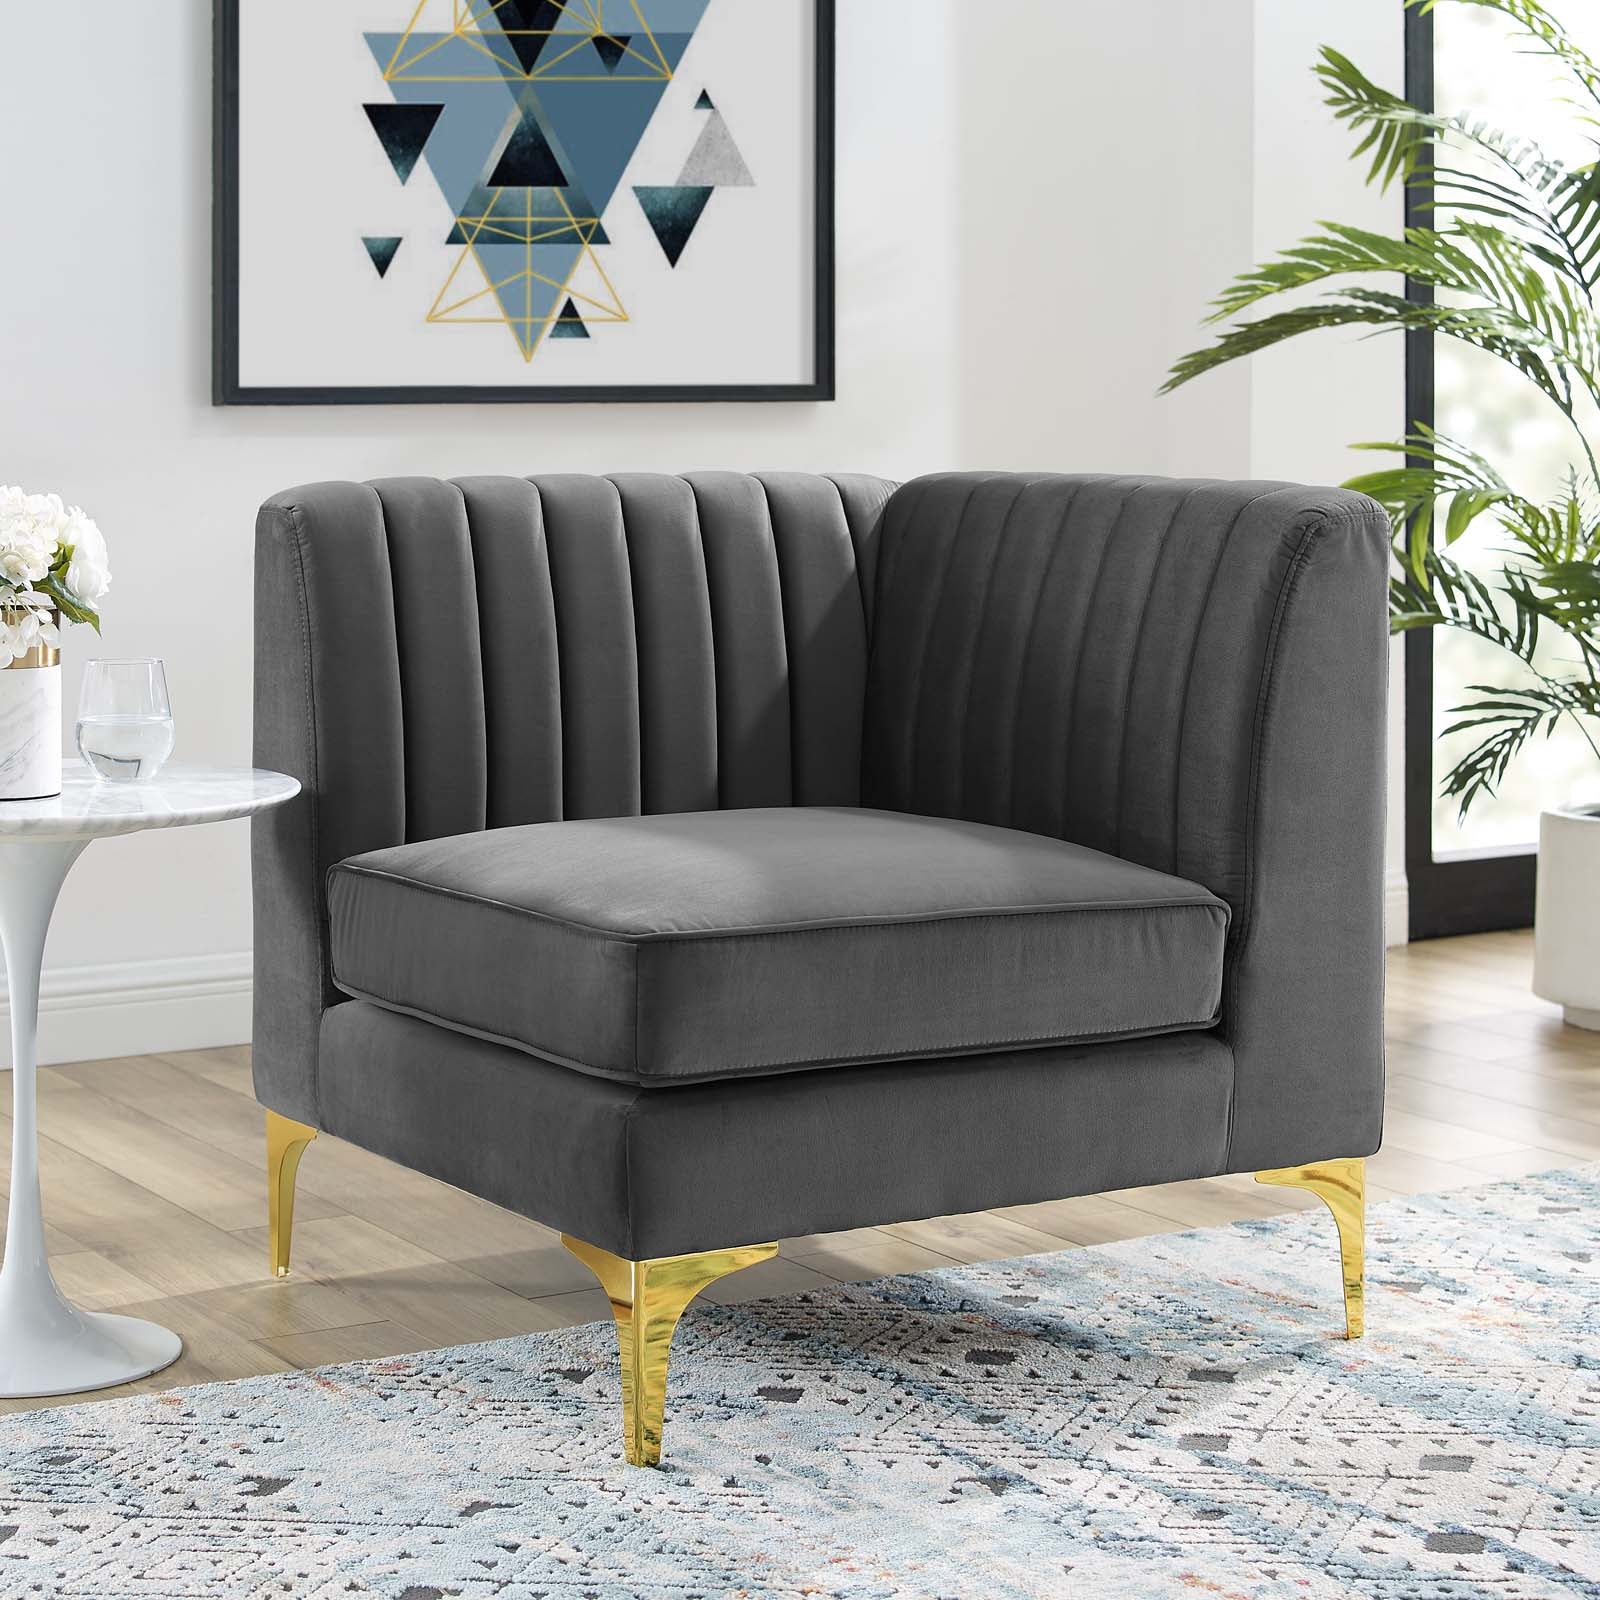 Modway Accent Chairs - Triumph Channel Tufted Performance Velvet Sectional Sofa Corner Chair Gray